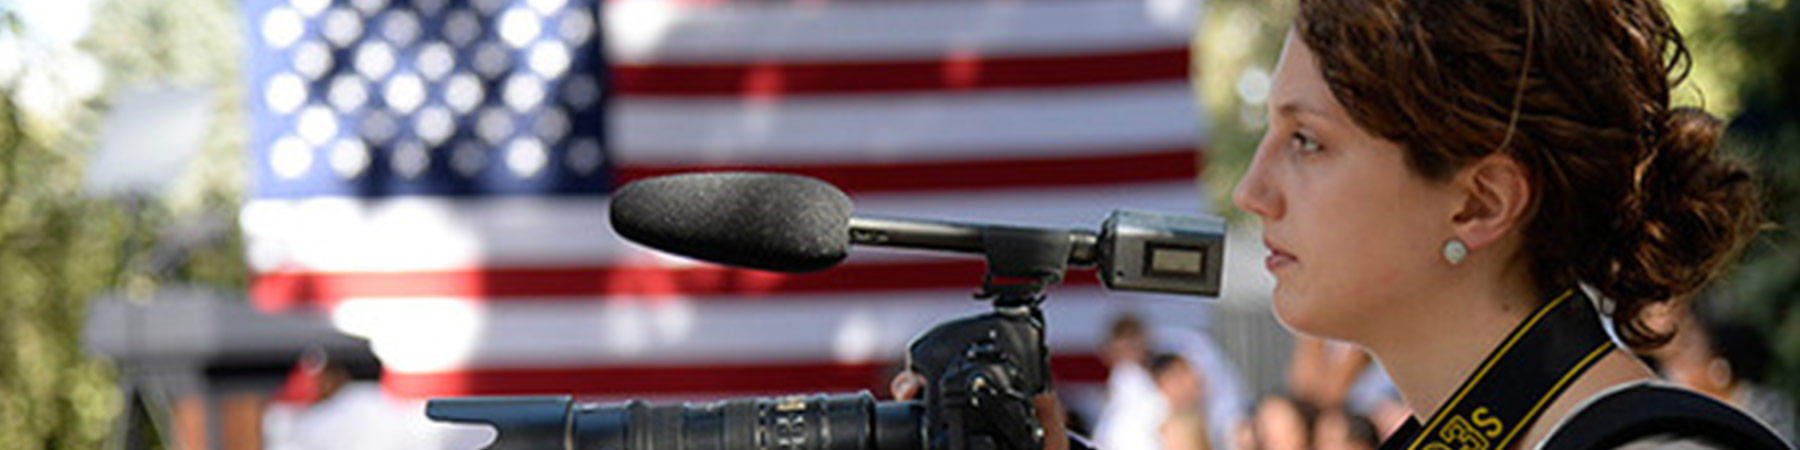 Photo of a camera woman holding a camera in front of her with an American flag in the background